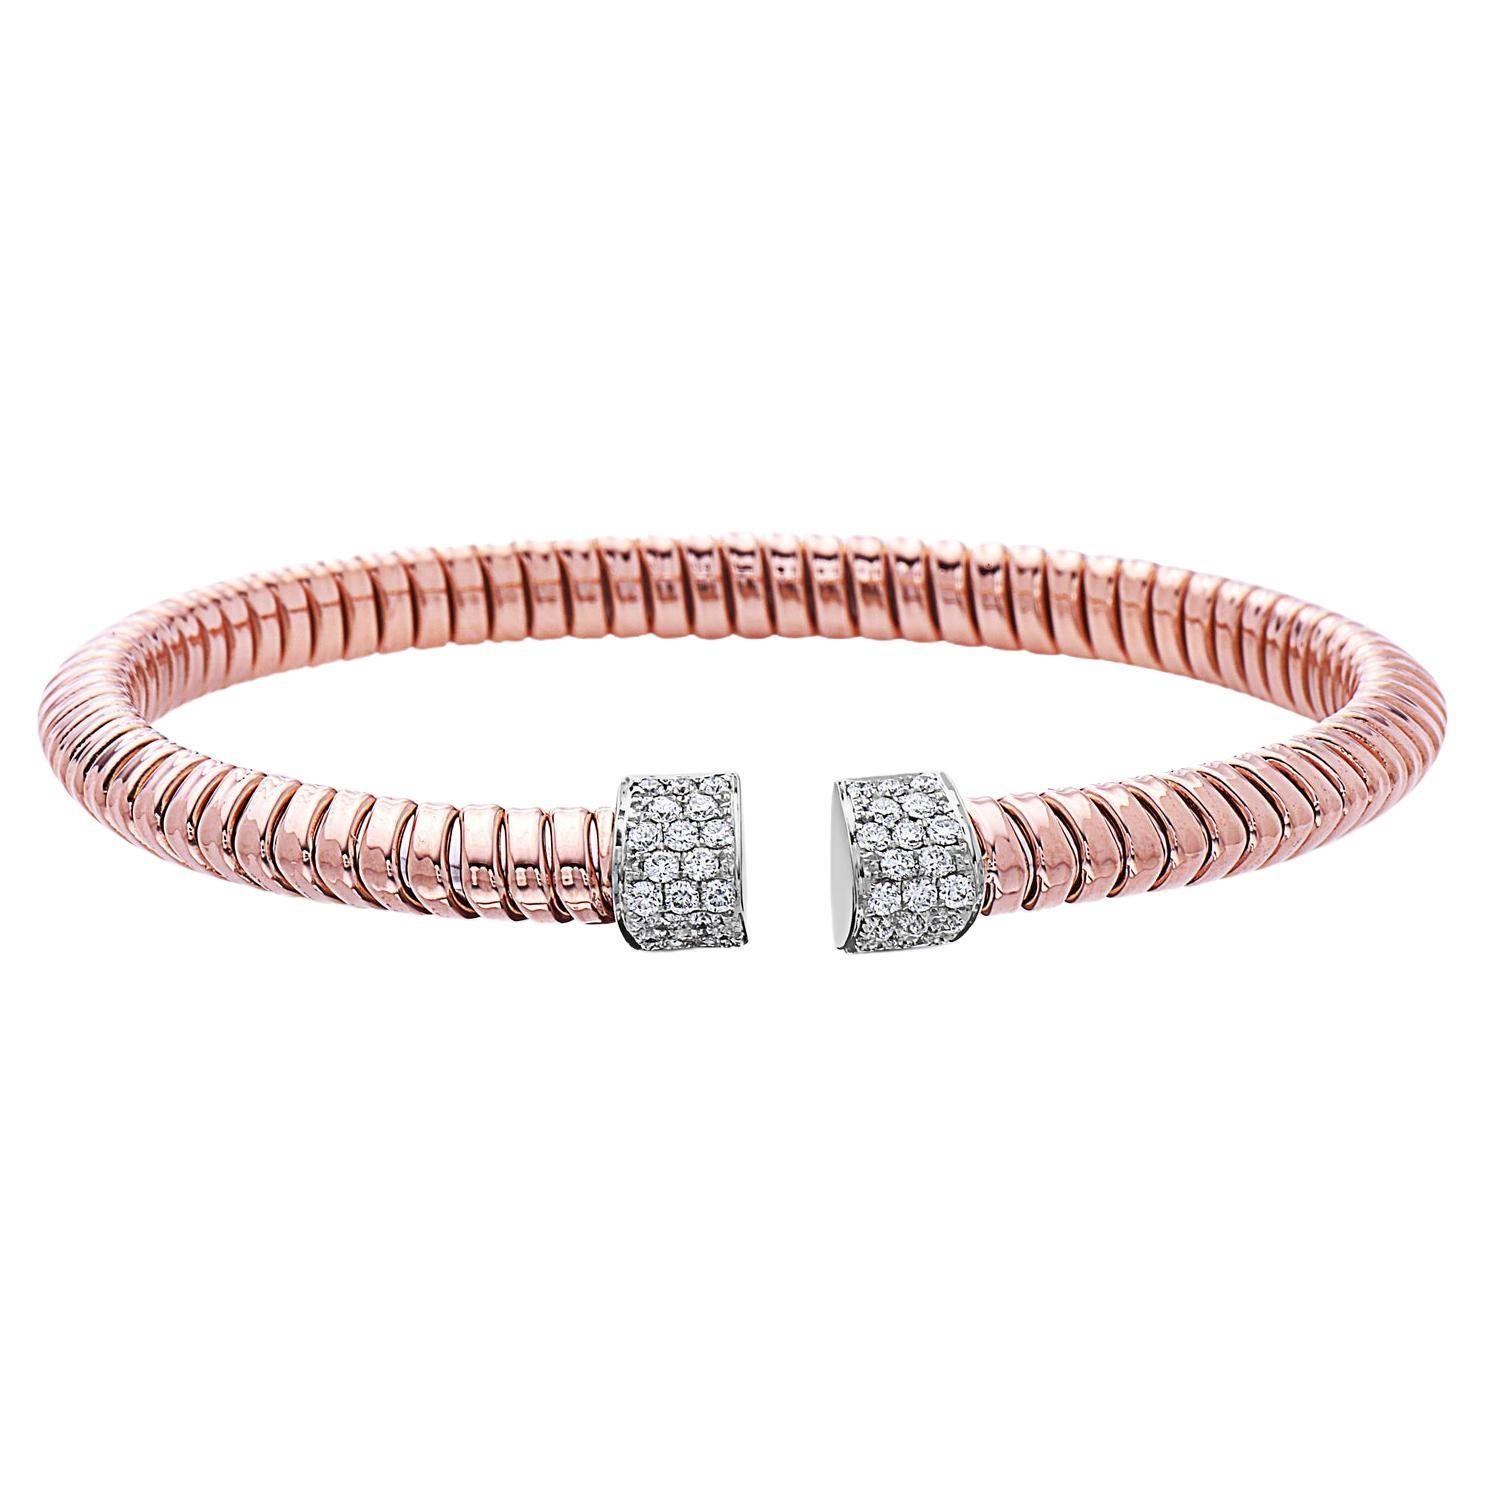 Afarin Collection Tubogas Diamond Cuff Bangle Bracelet in 18k Pink and White Gol